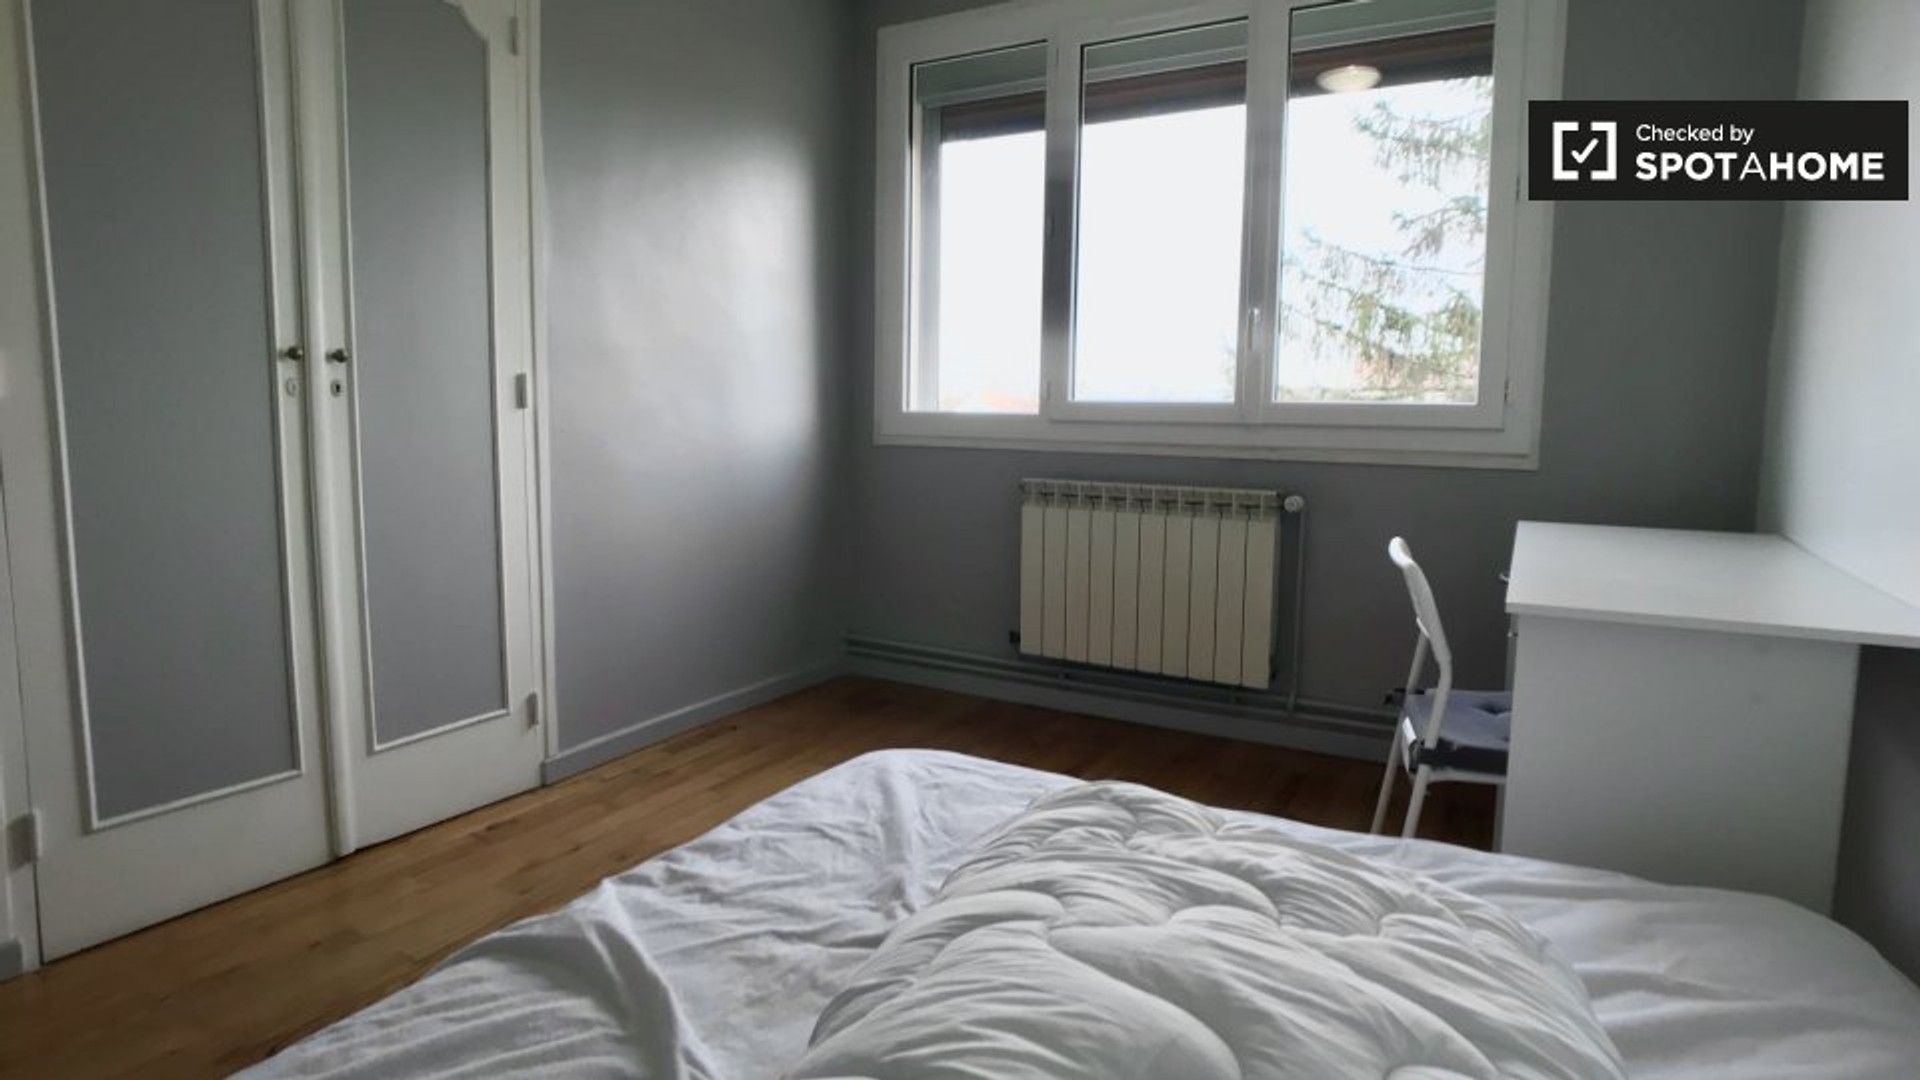 Cheap private room in Saint-denis